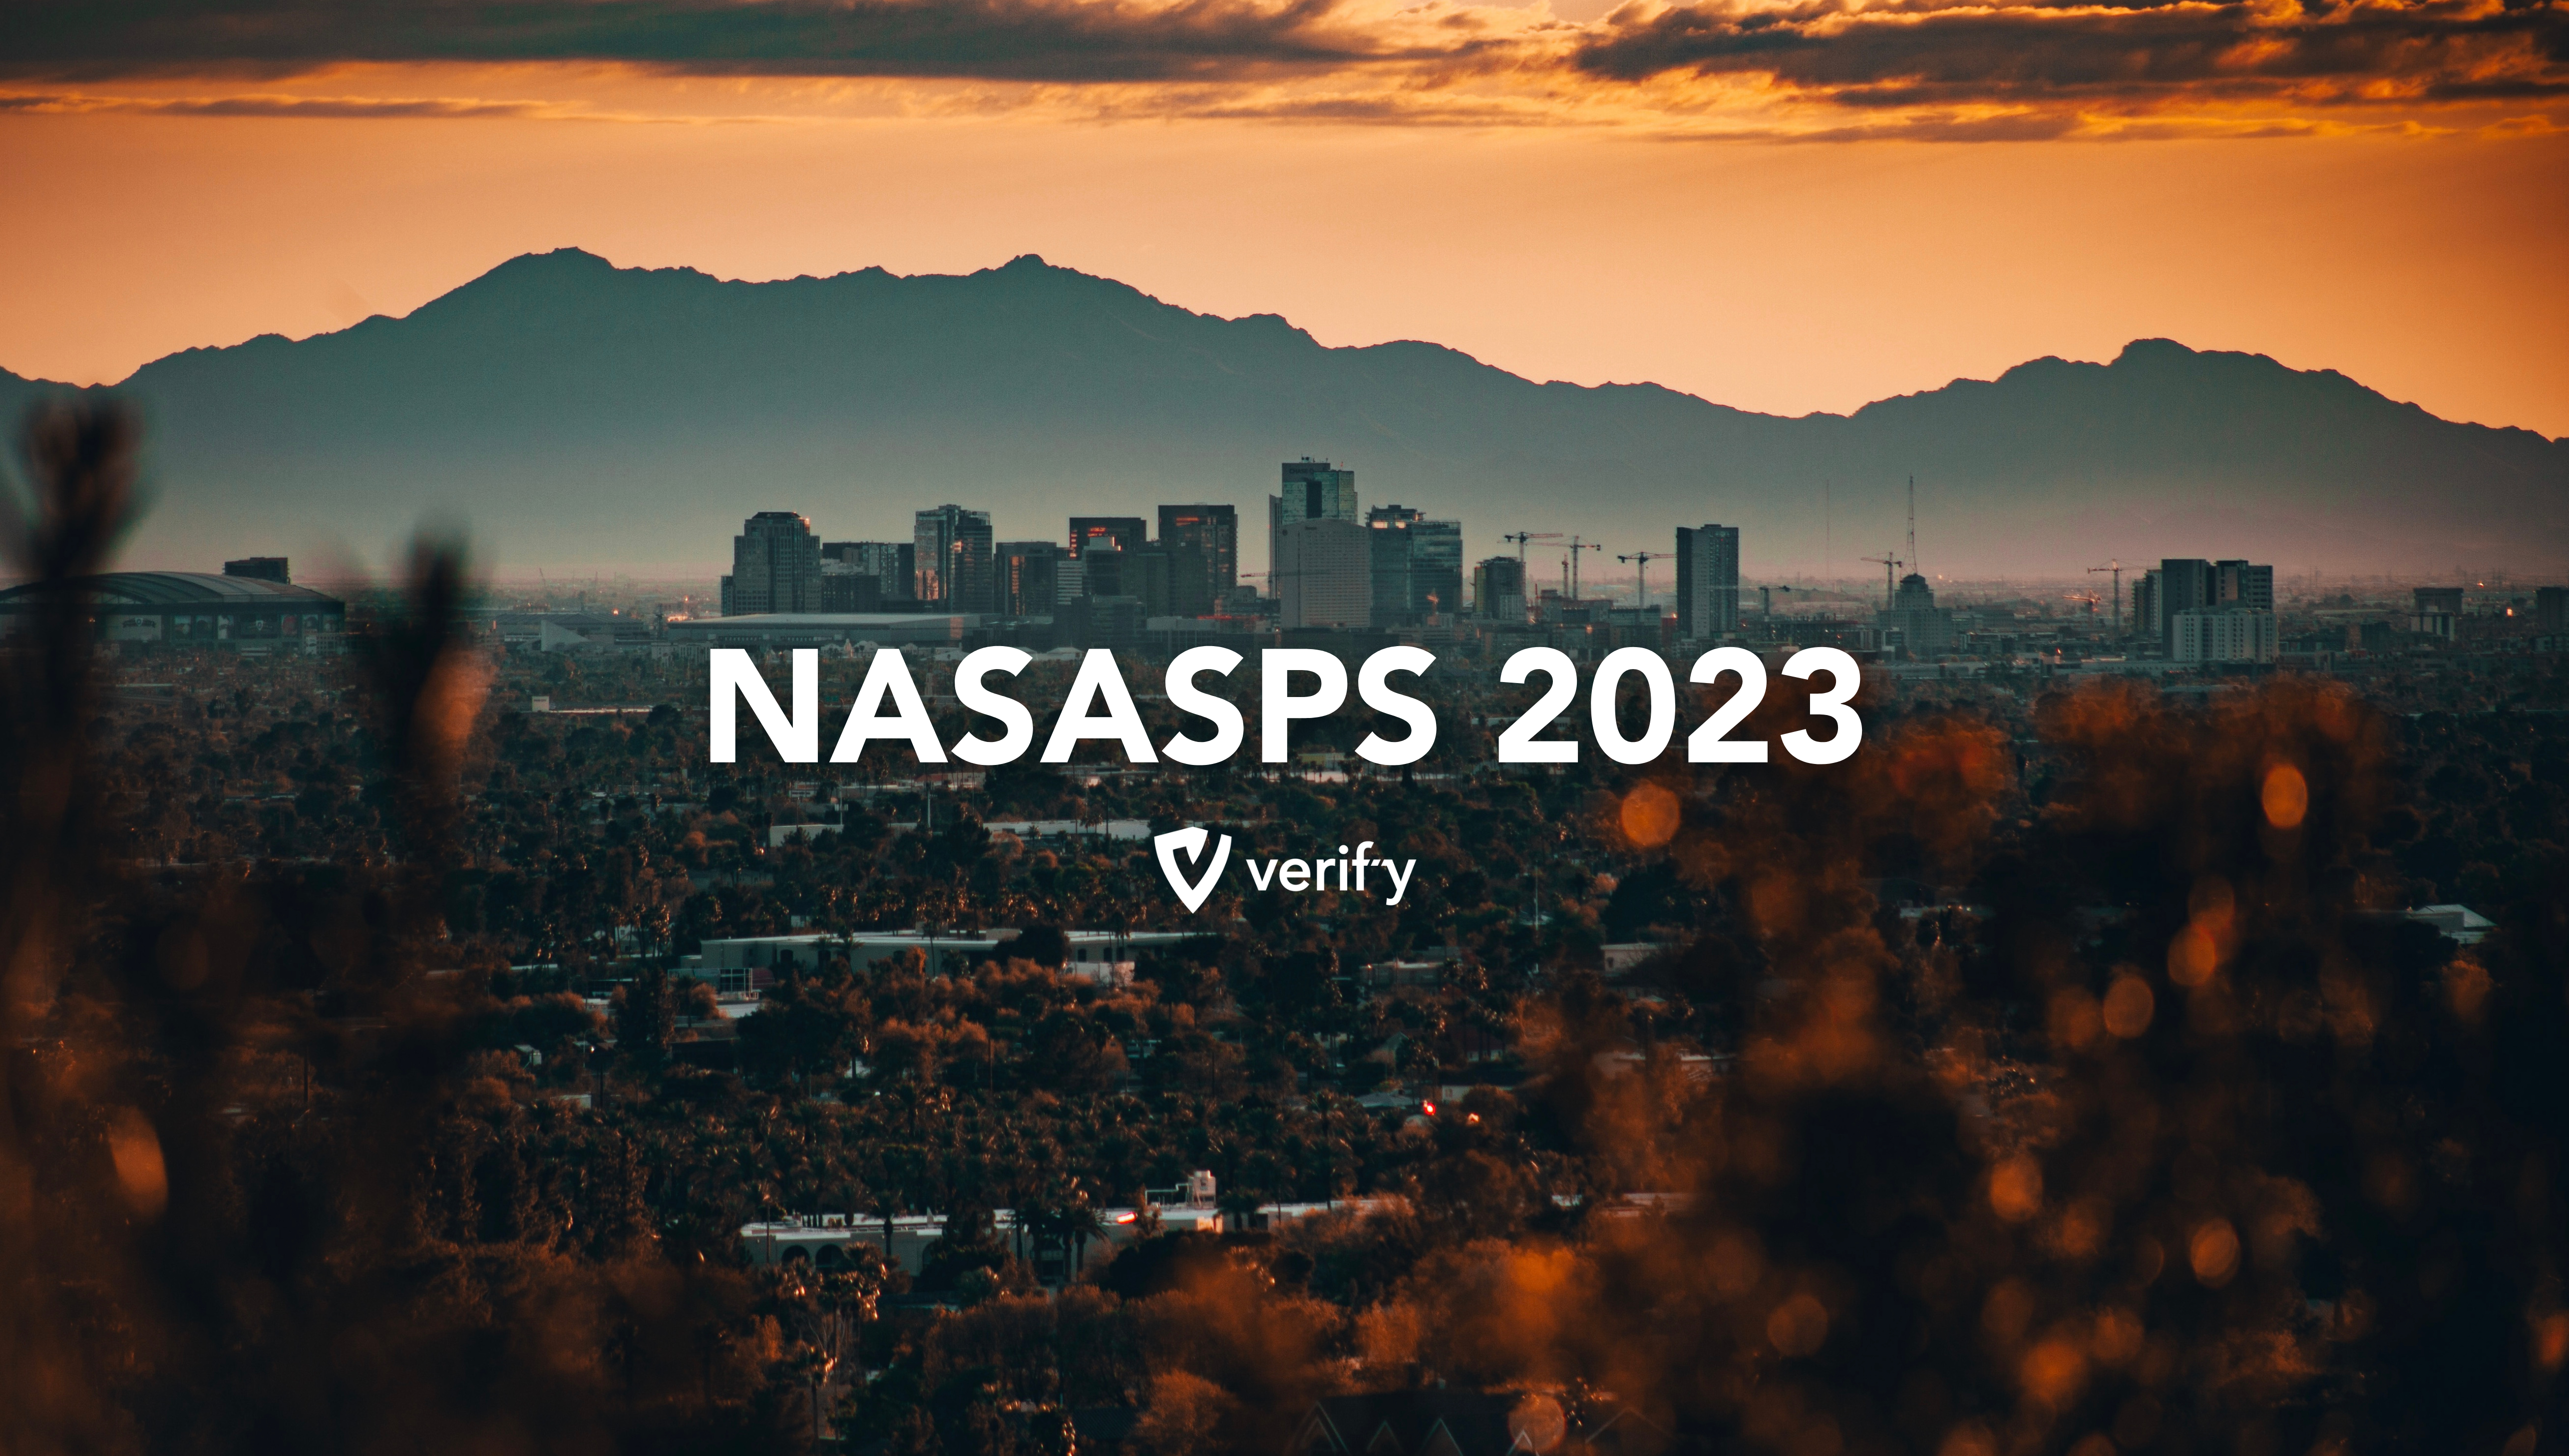 Photo of Phoenix, AZ at sunset with NASASPS 2023 written across and the Verif-y logo